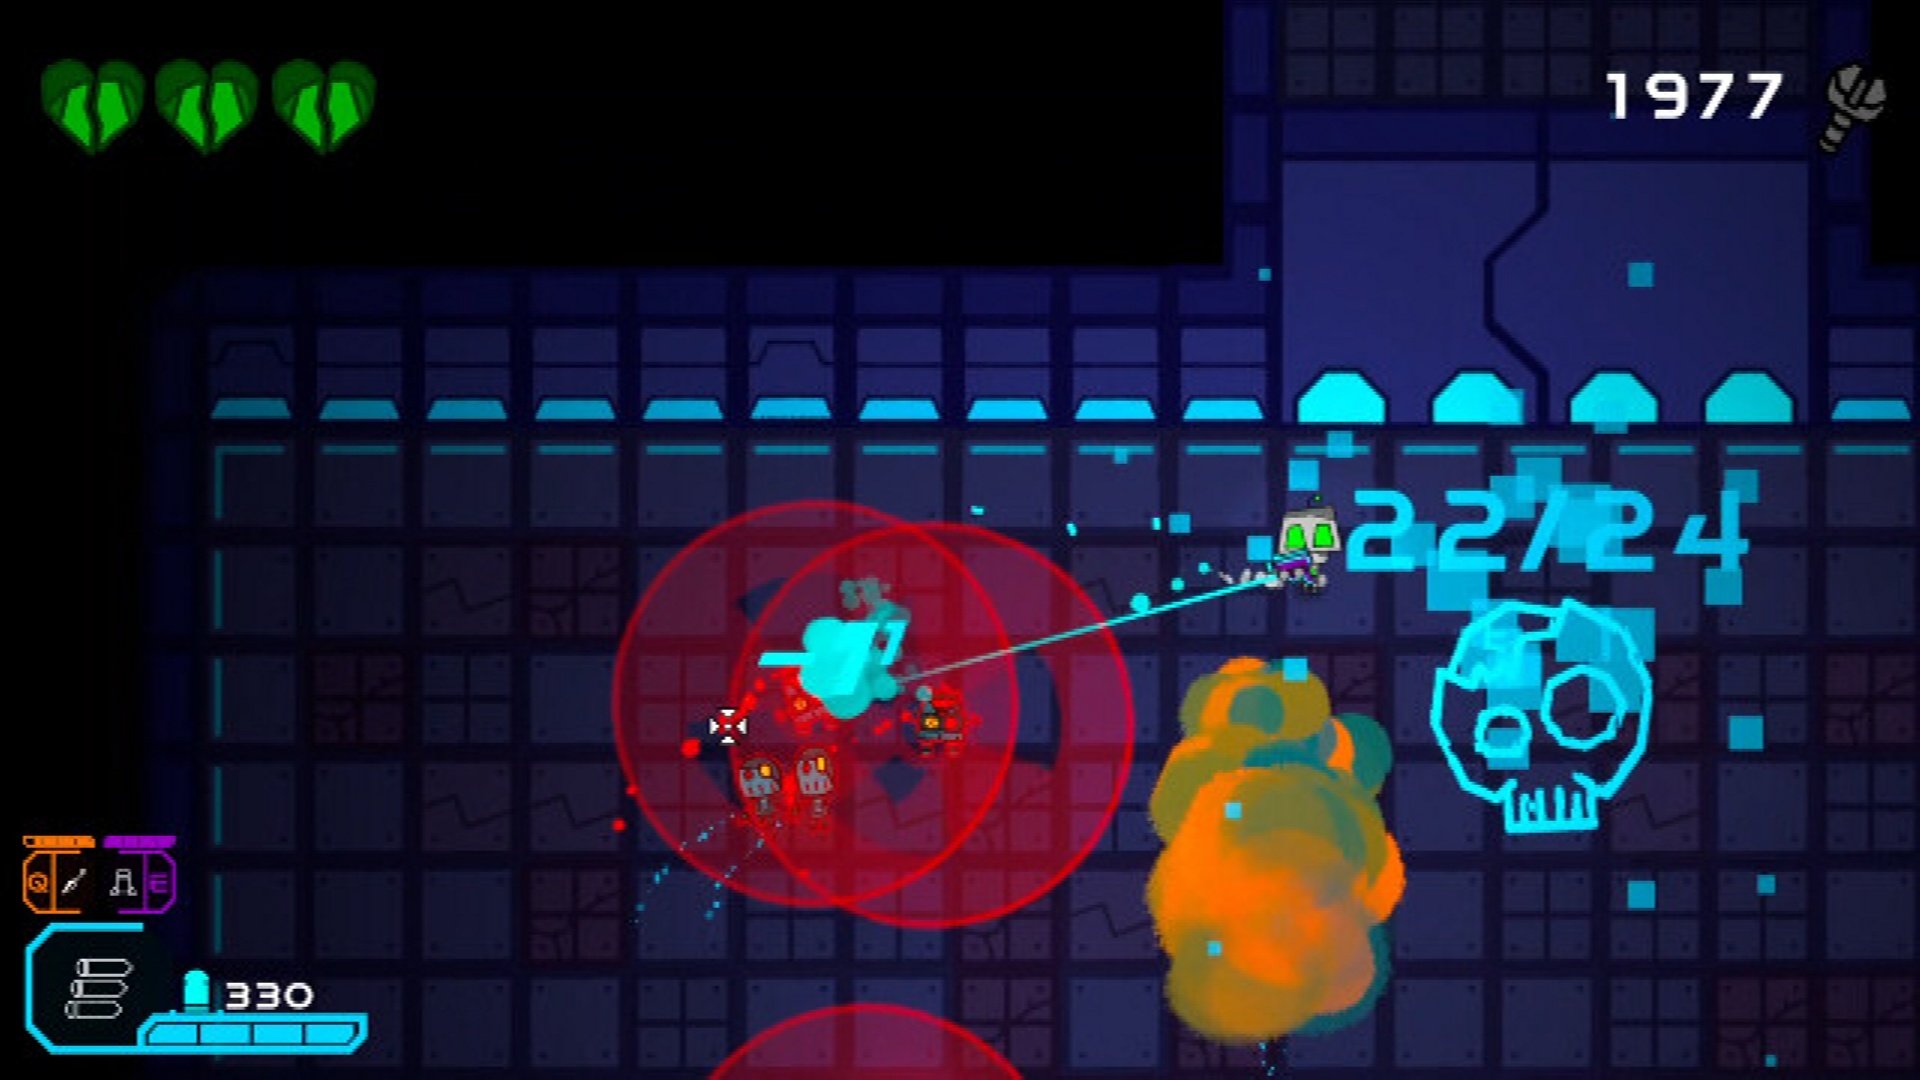 Bullet Hell Top-Down Shooters Get a Cartoony Makeover in Deadlocked